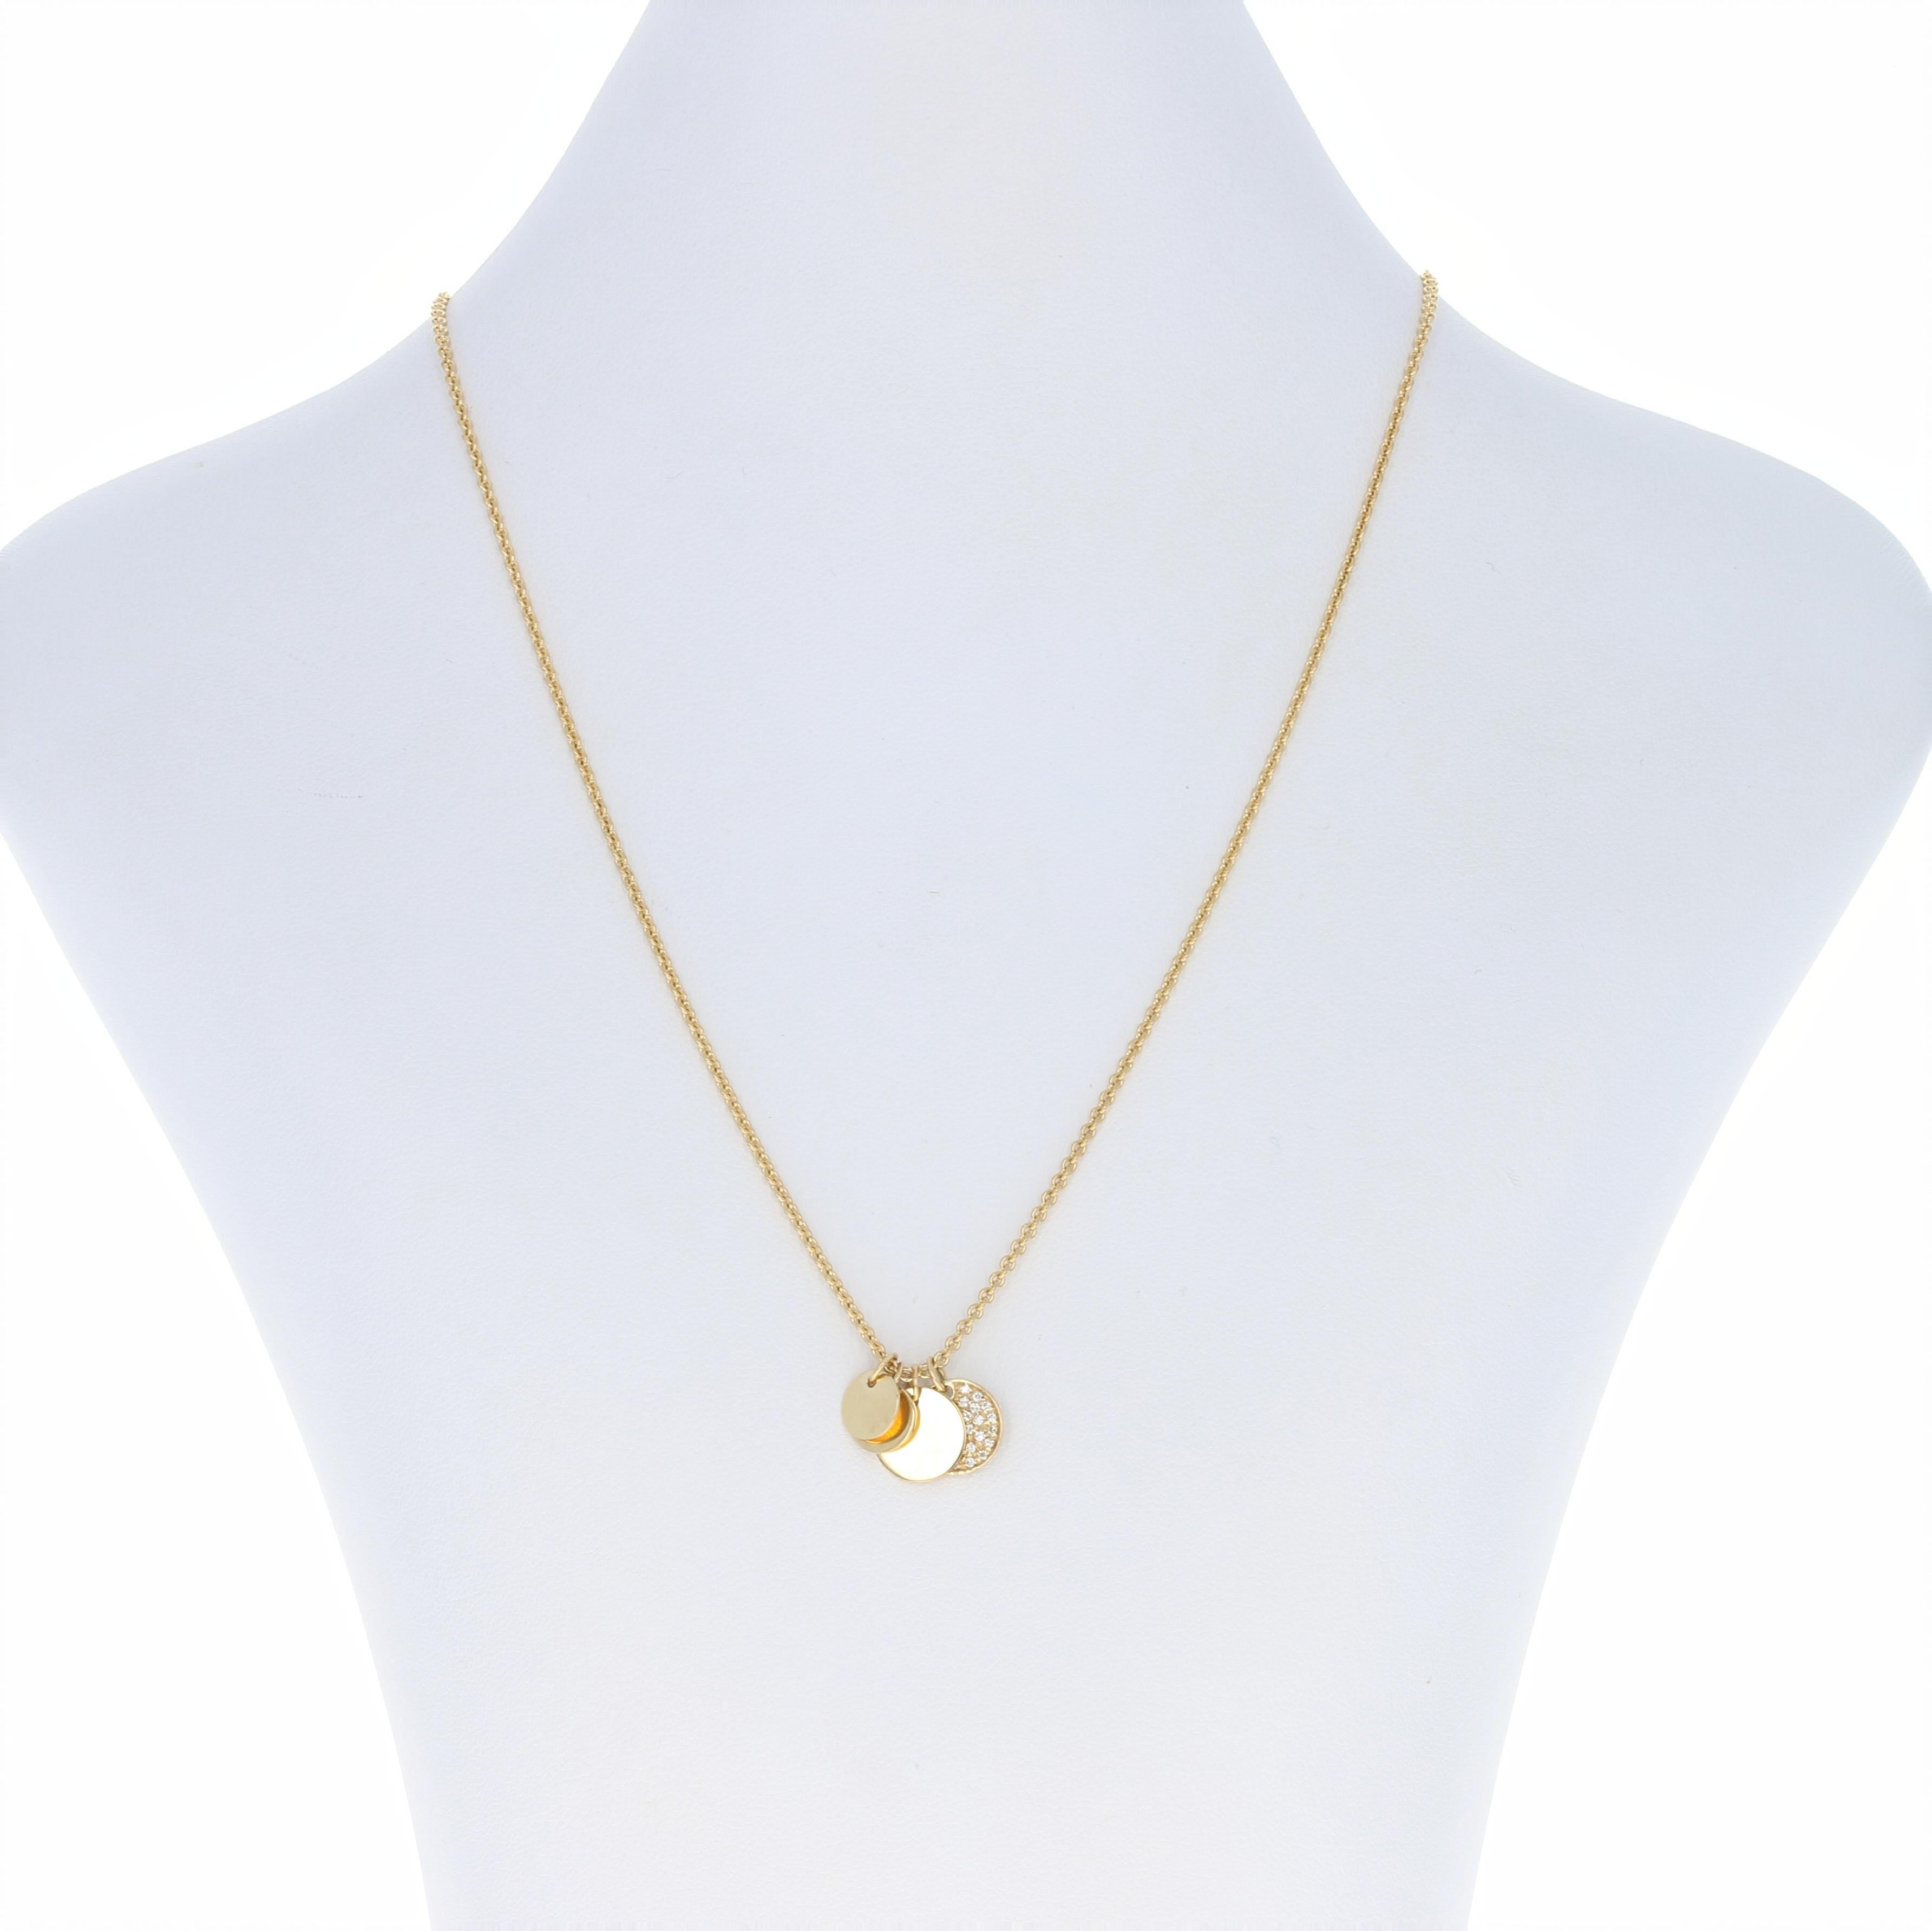 Surprise the special woman in your life with a sweet token of your love! Crafted in high purity 18k yellow gold, this NEW cable chain necklace is graced by a sparkling diamond-accented diamond disc pendant which is accompanied by a luminous trio of